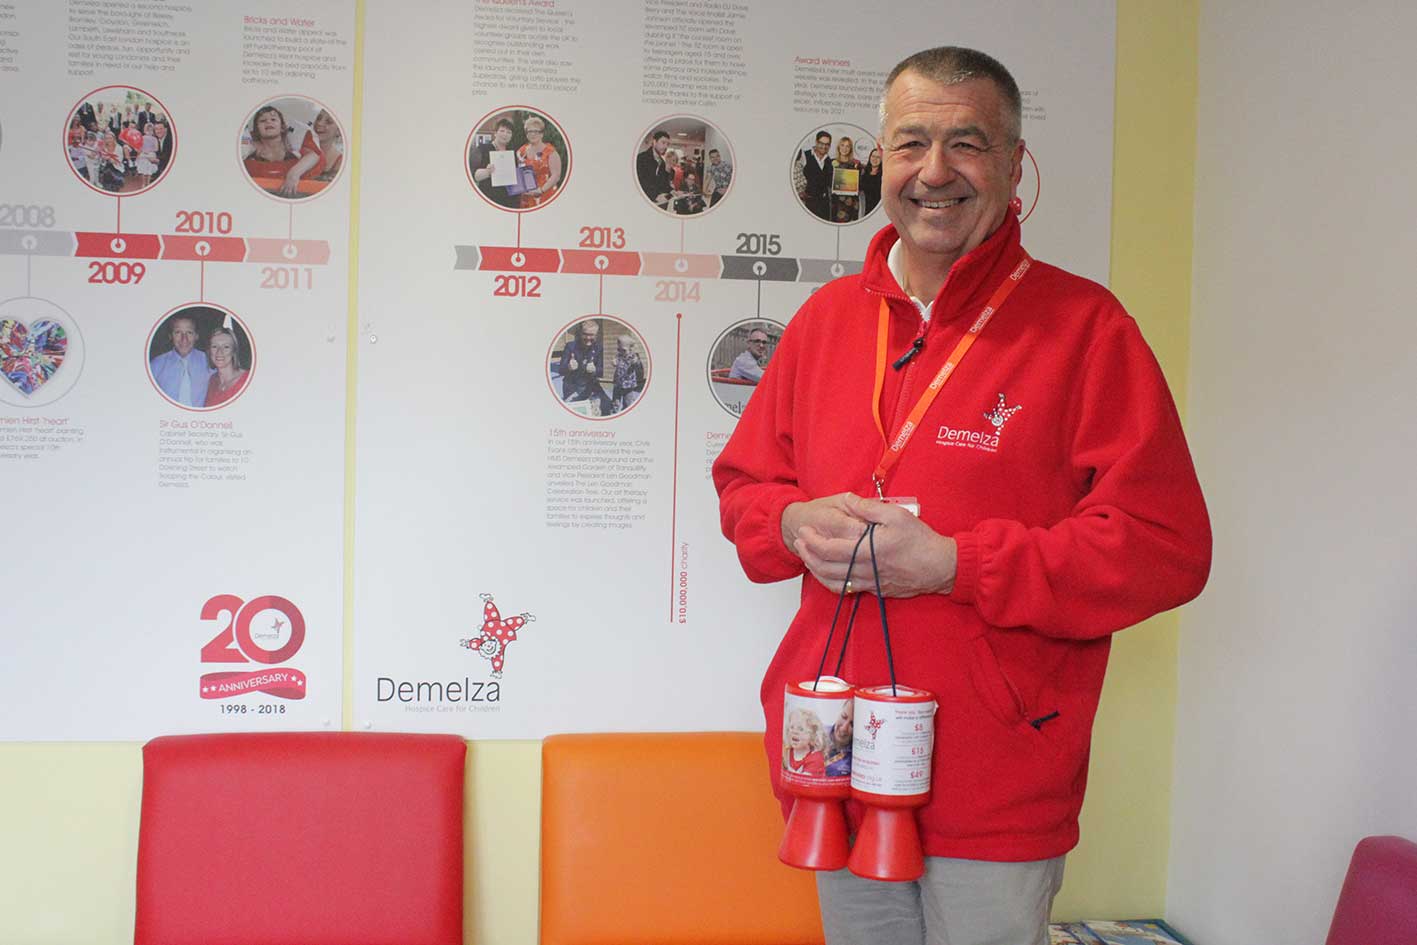 A Demelza volunteer wearing a red fleece is holding collection pots.